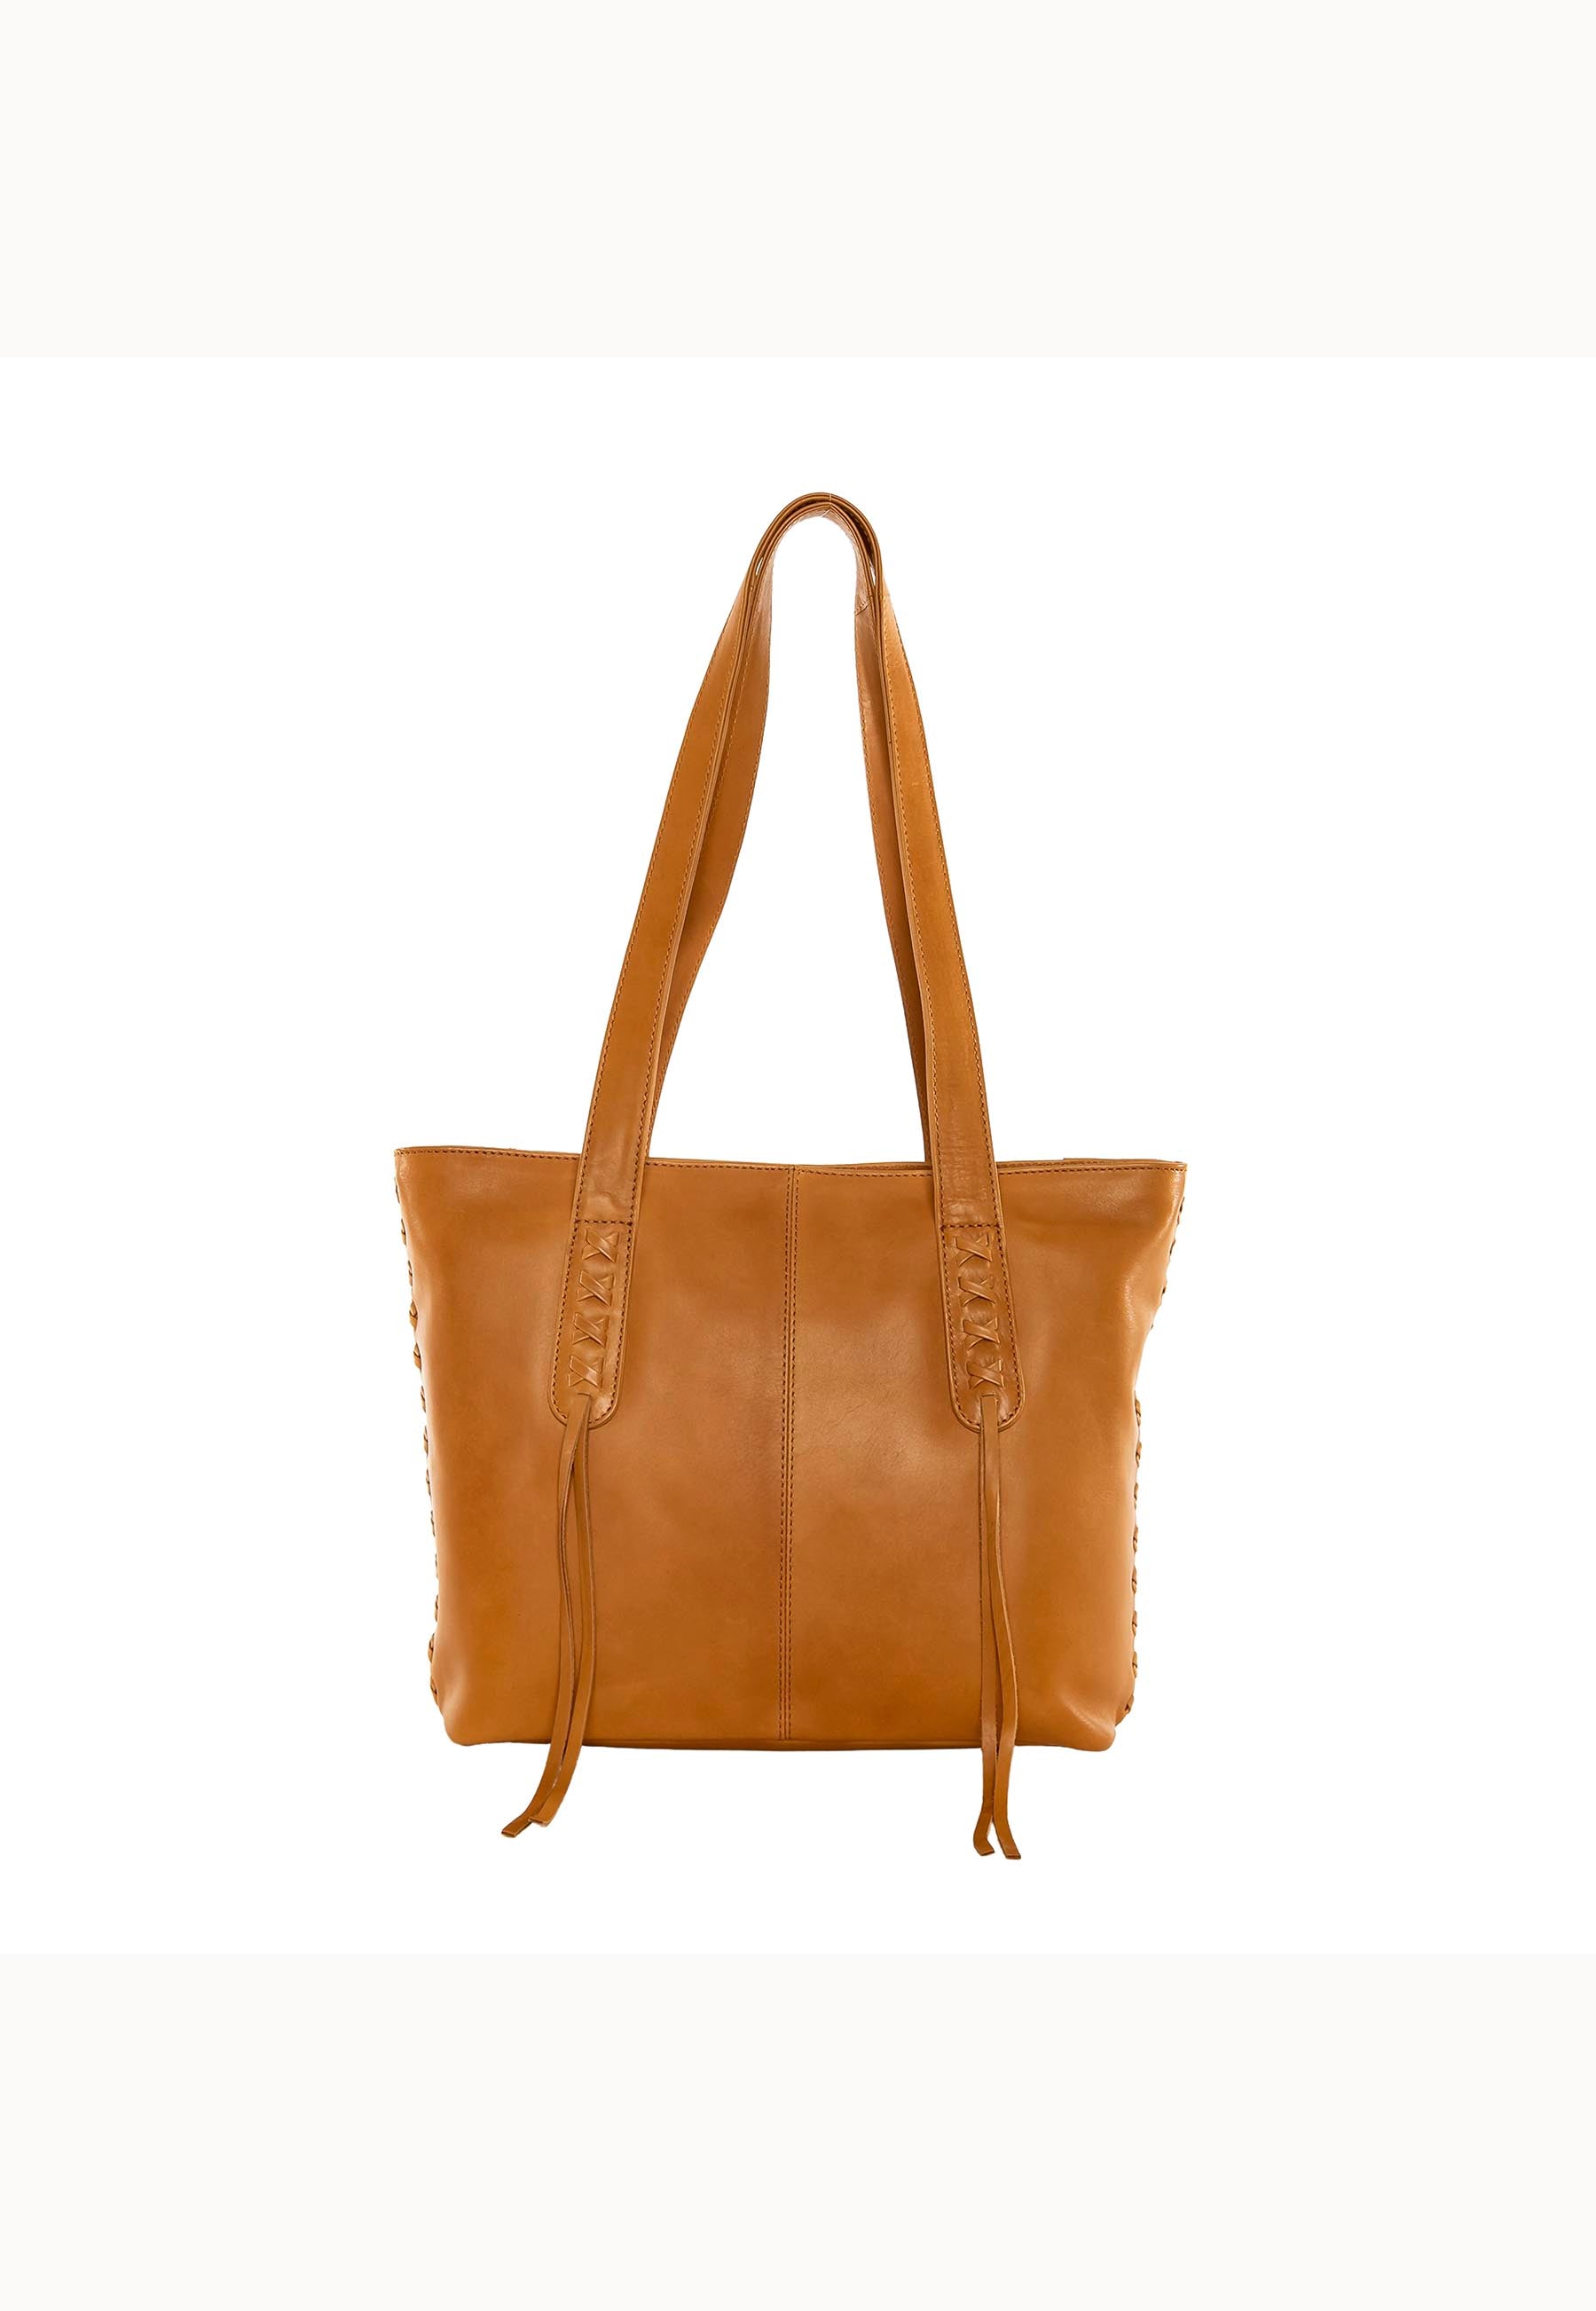 Caramel leather handbag for conceal carry